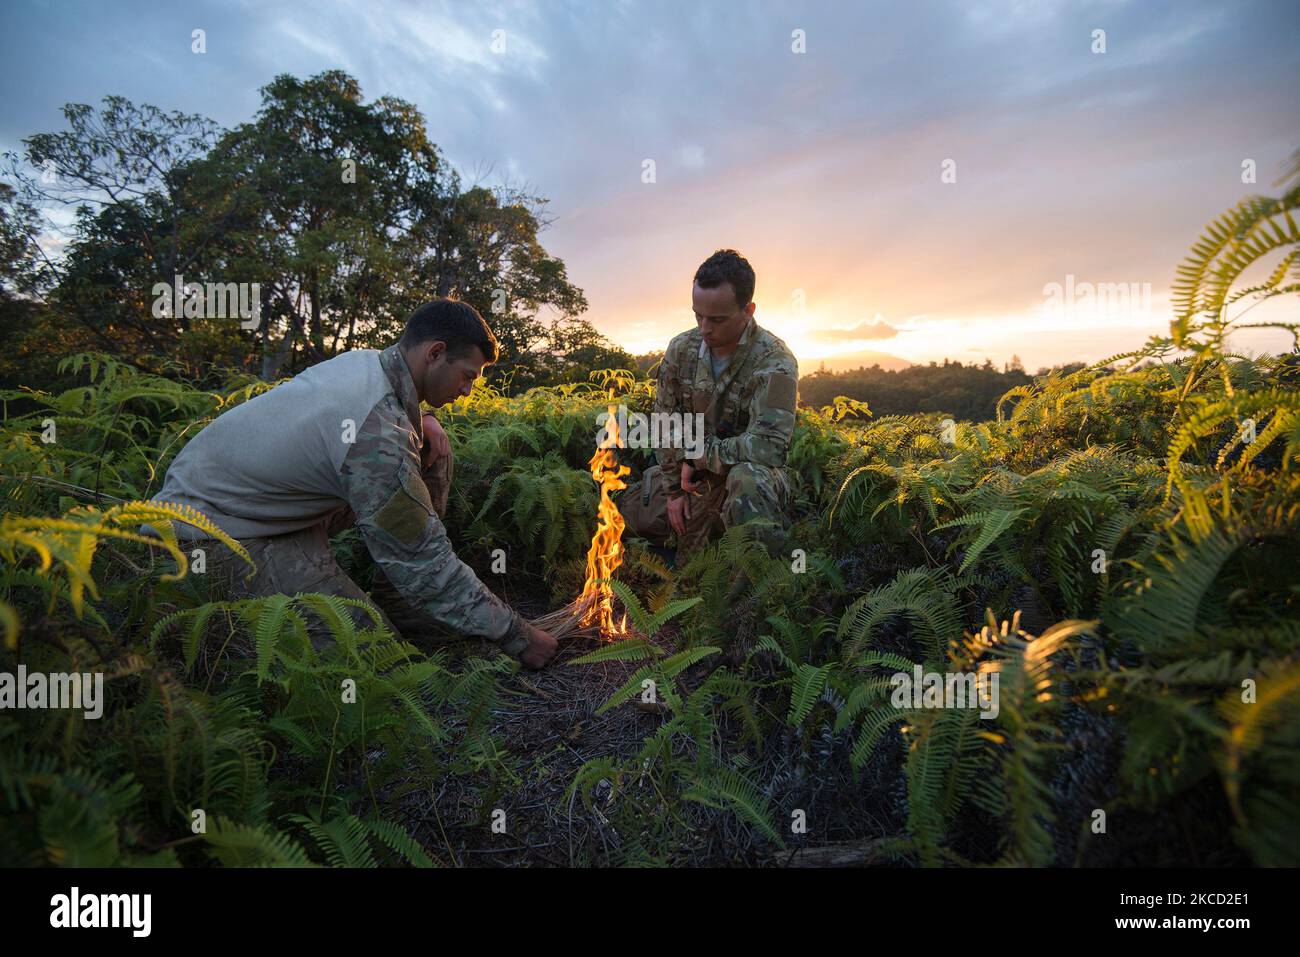 Airmen conduct survival training at the U.S. Army's Jungle Operations Training Course in Hawaii. Stock Photo